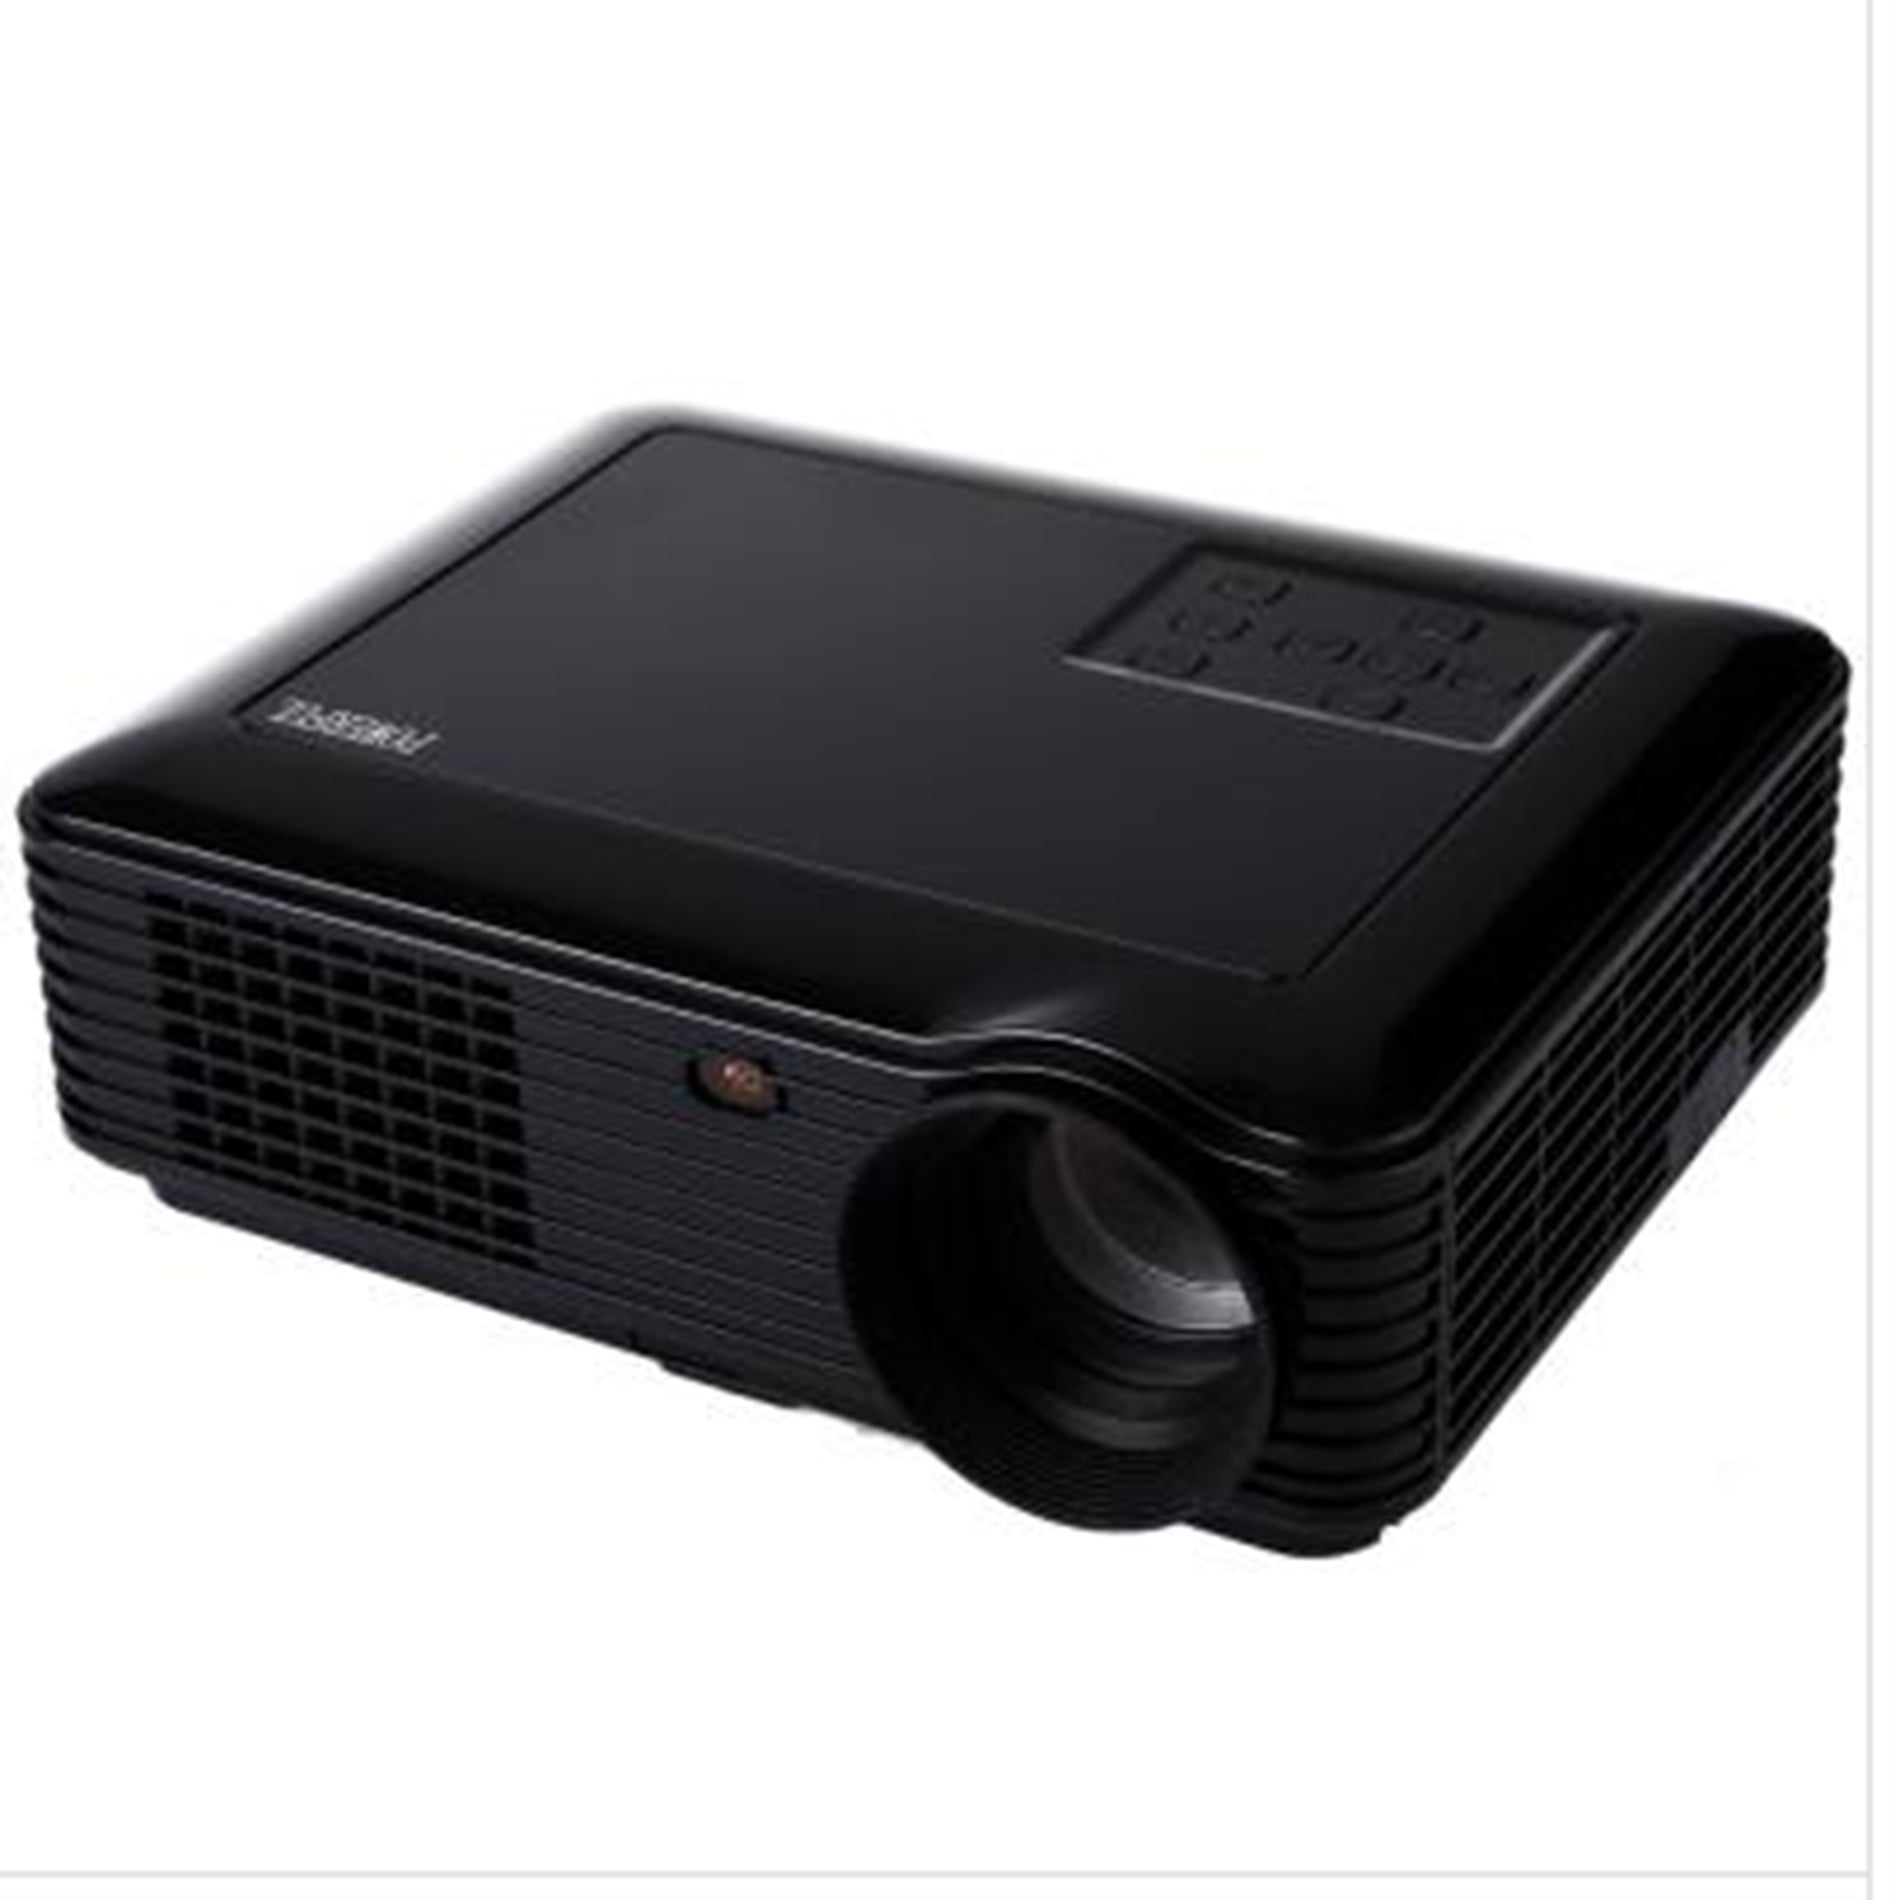 Philips Proscreen 4000 LCD Projector with Case VGA Conference Room